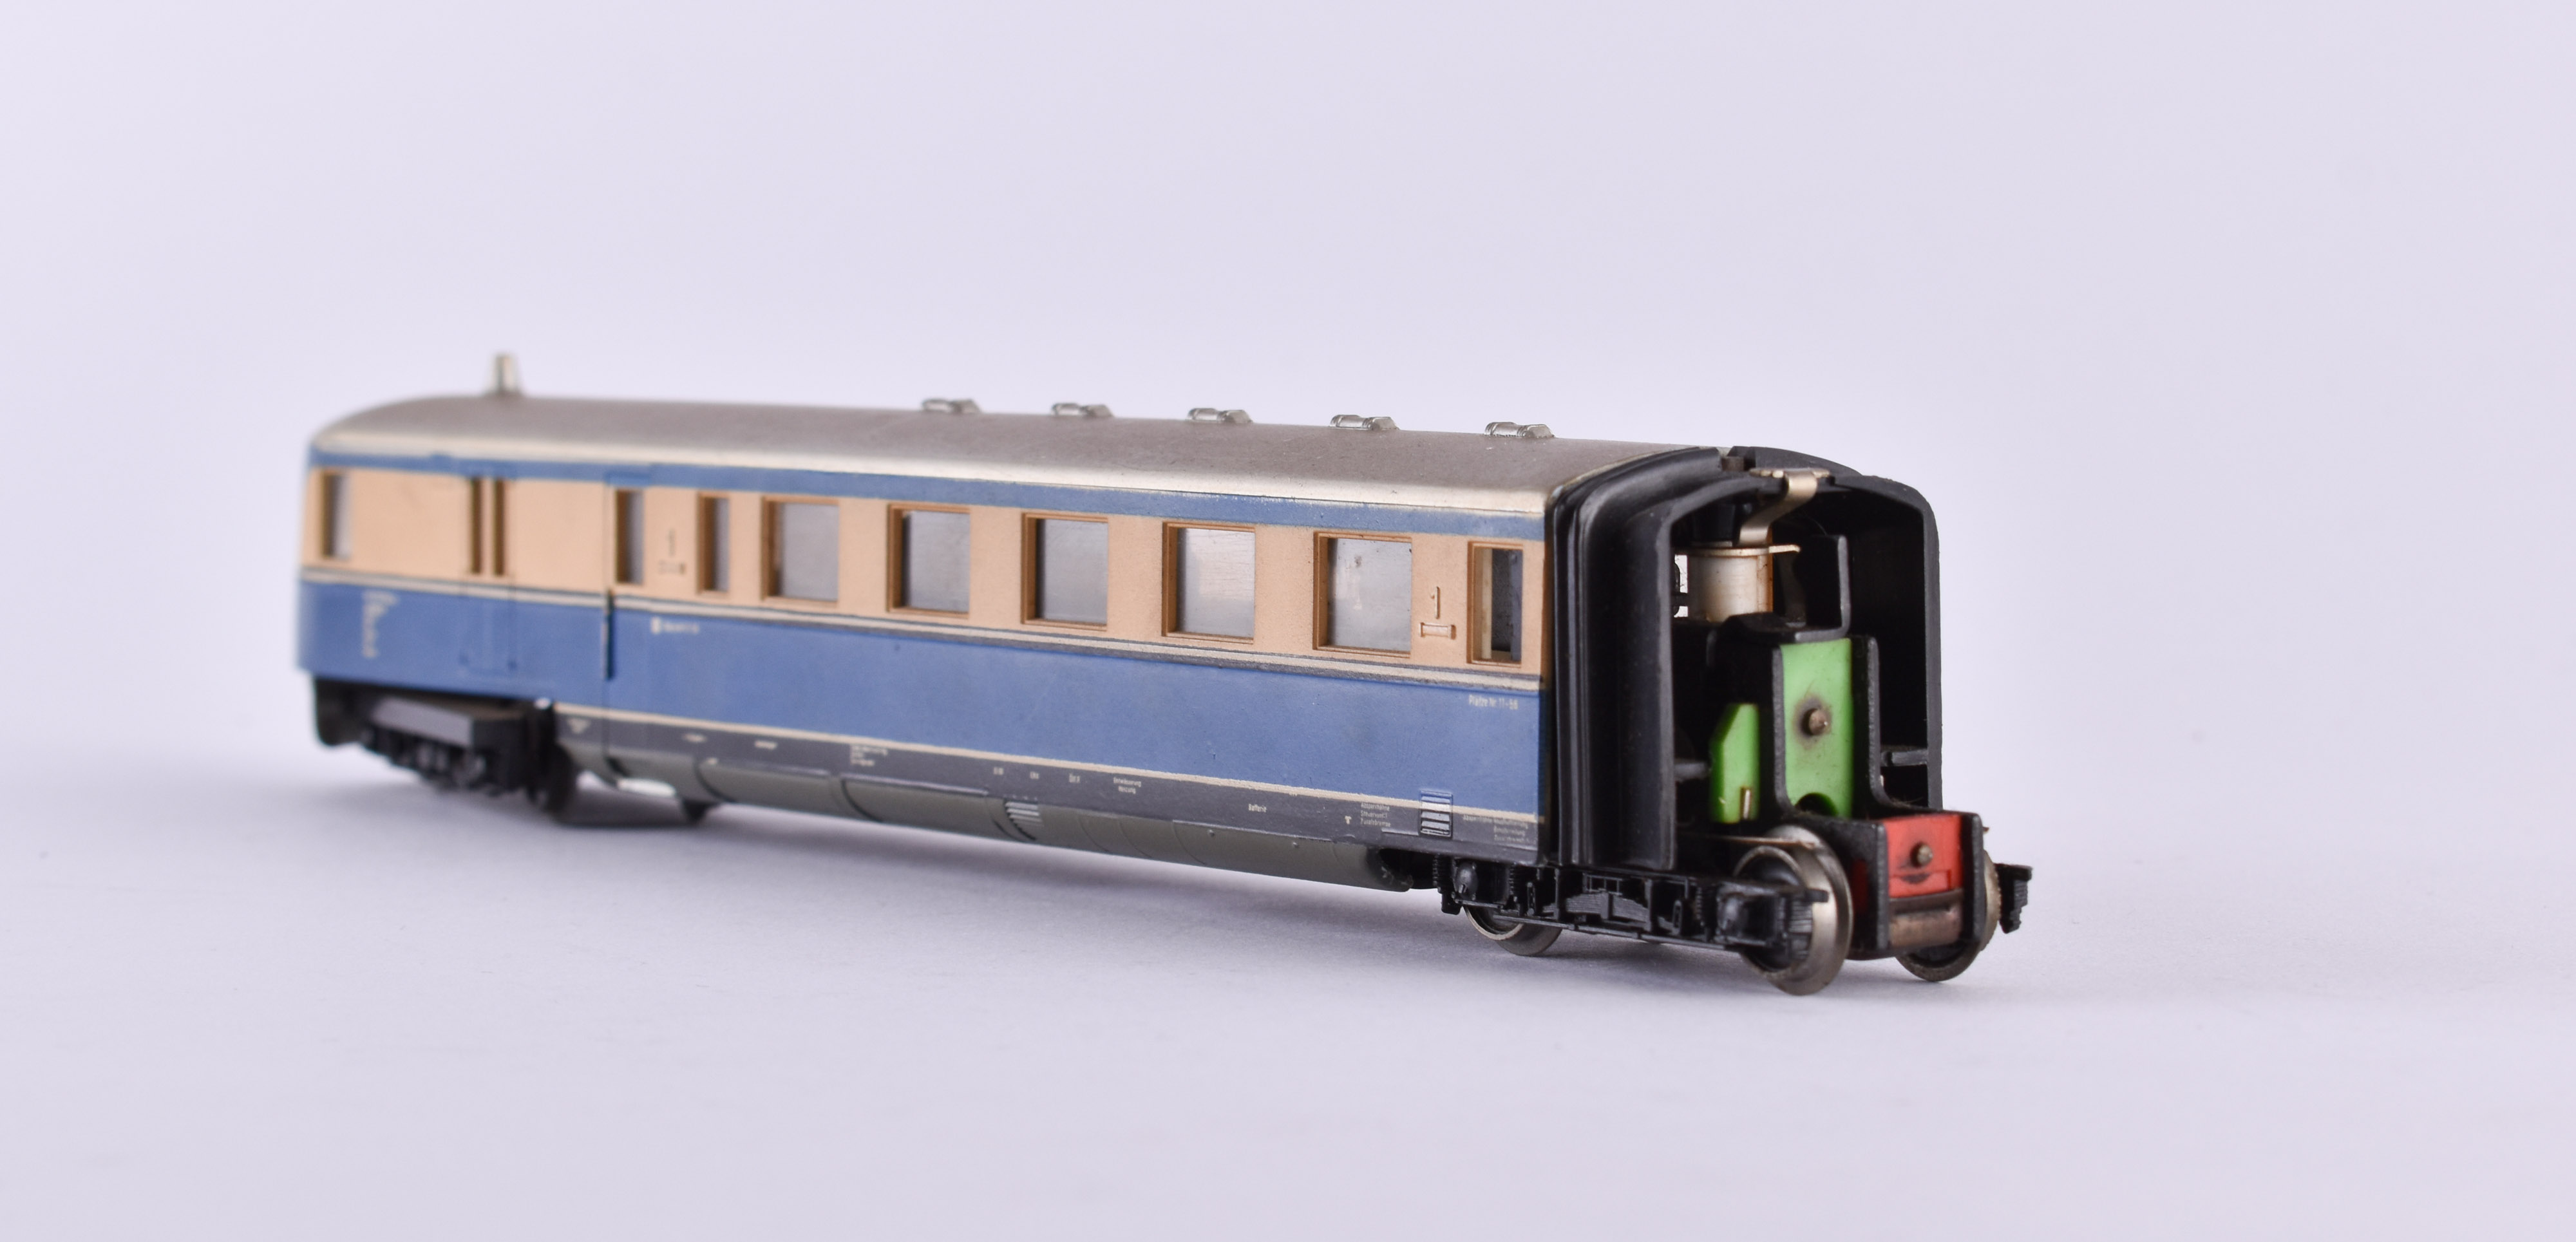 High-speed railcar VT 137154 a DR - Piko - Image 2 of 3